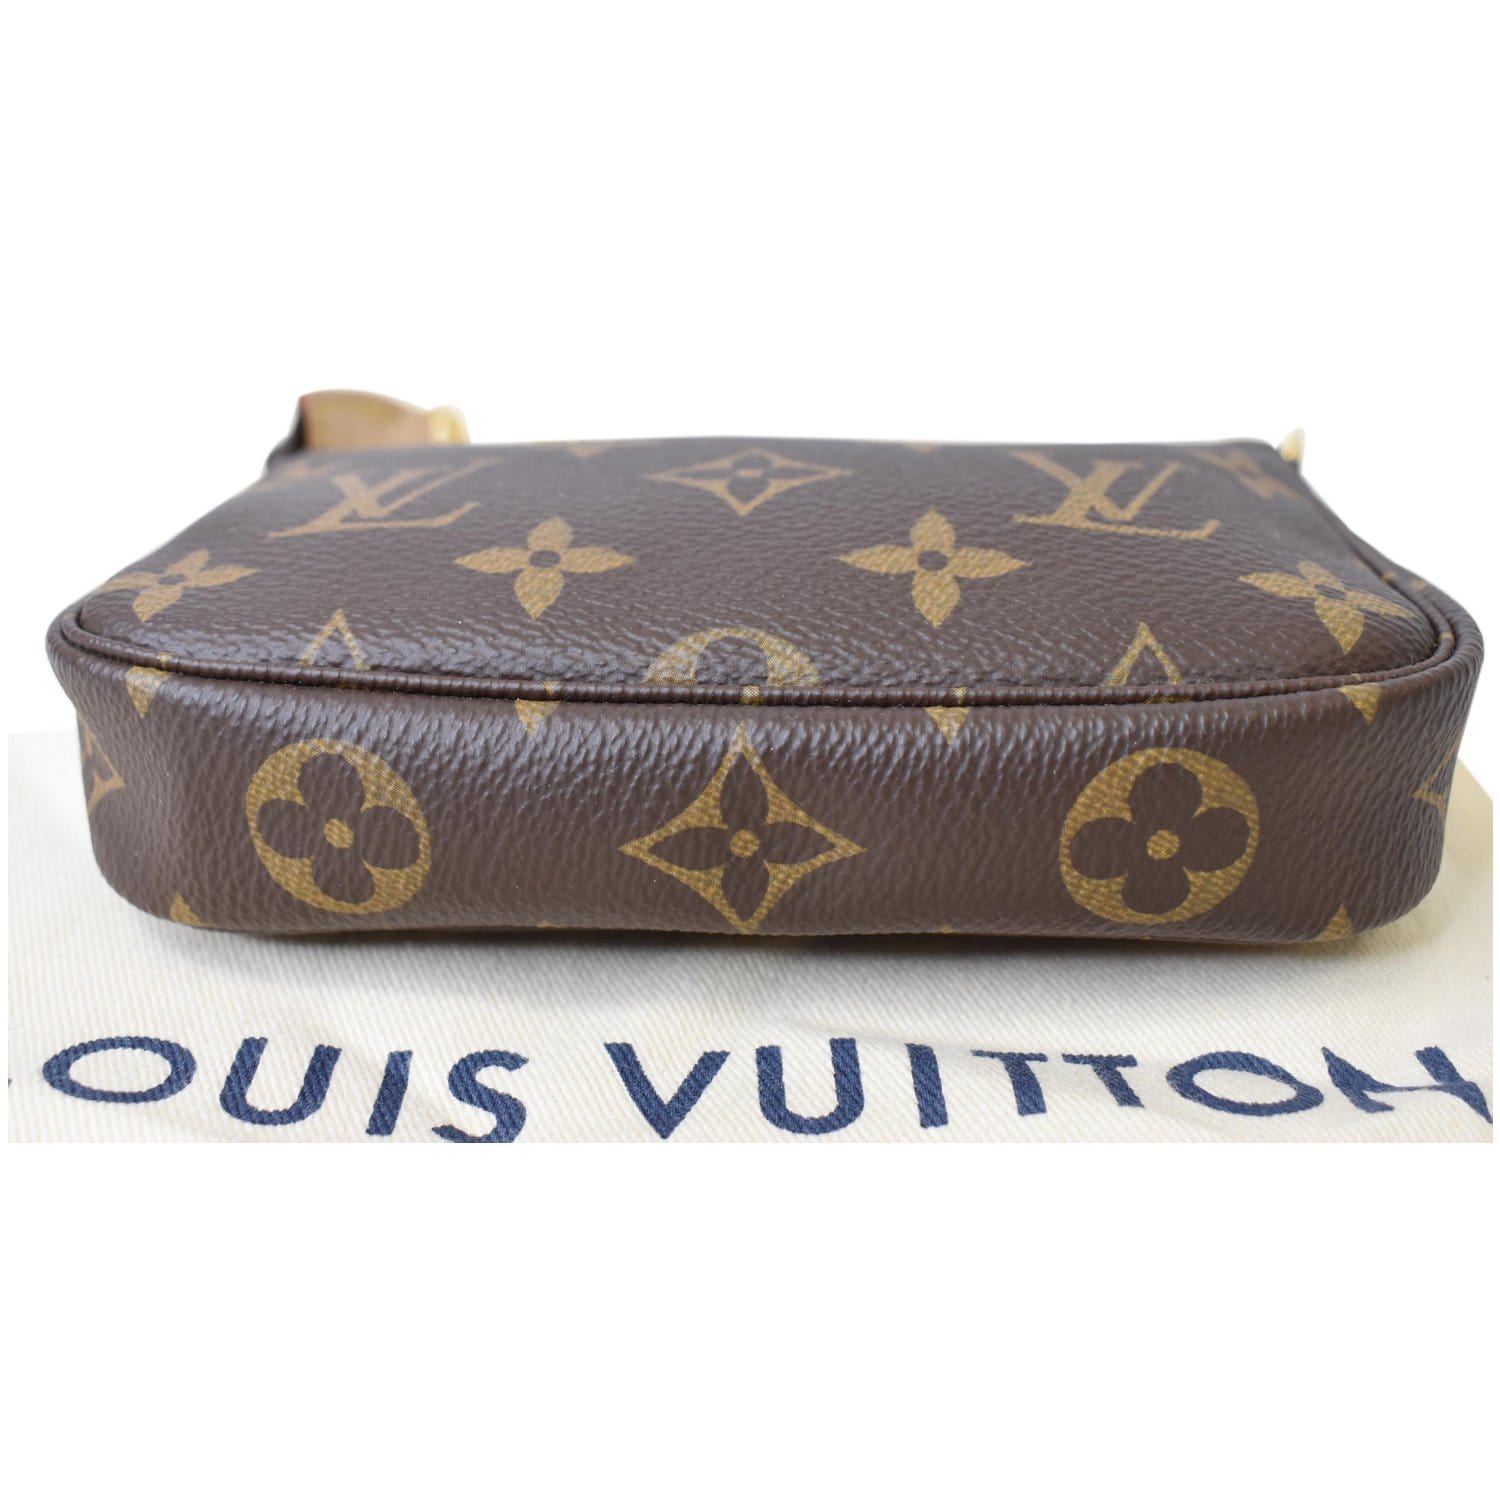 IS THE MINI LV POCHETTE WORTH IT? ✧˖°🌷📎⋆ ˚｡⋆୨୧˚, Gallery posted by yuki  ⋆˚✿˖°